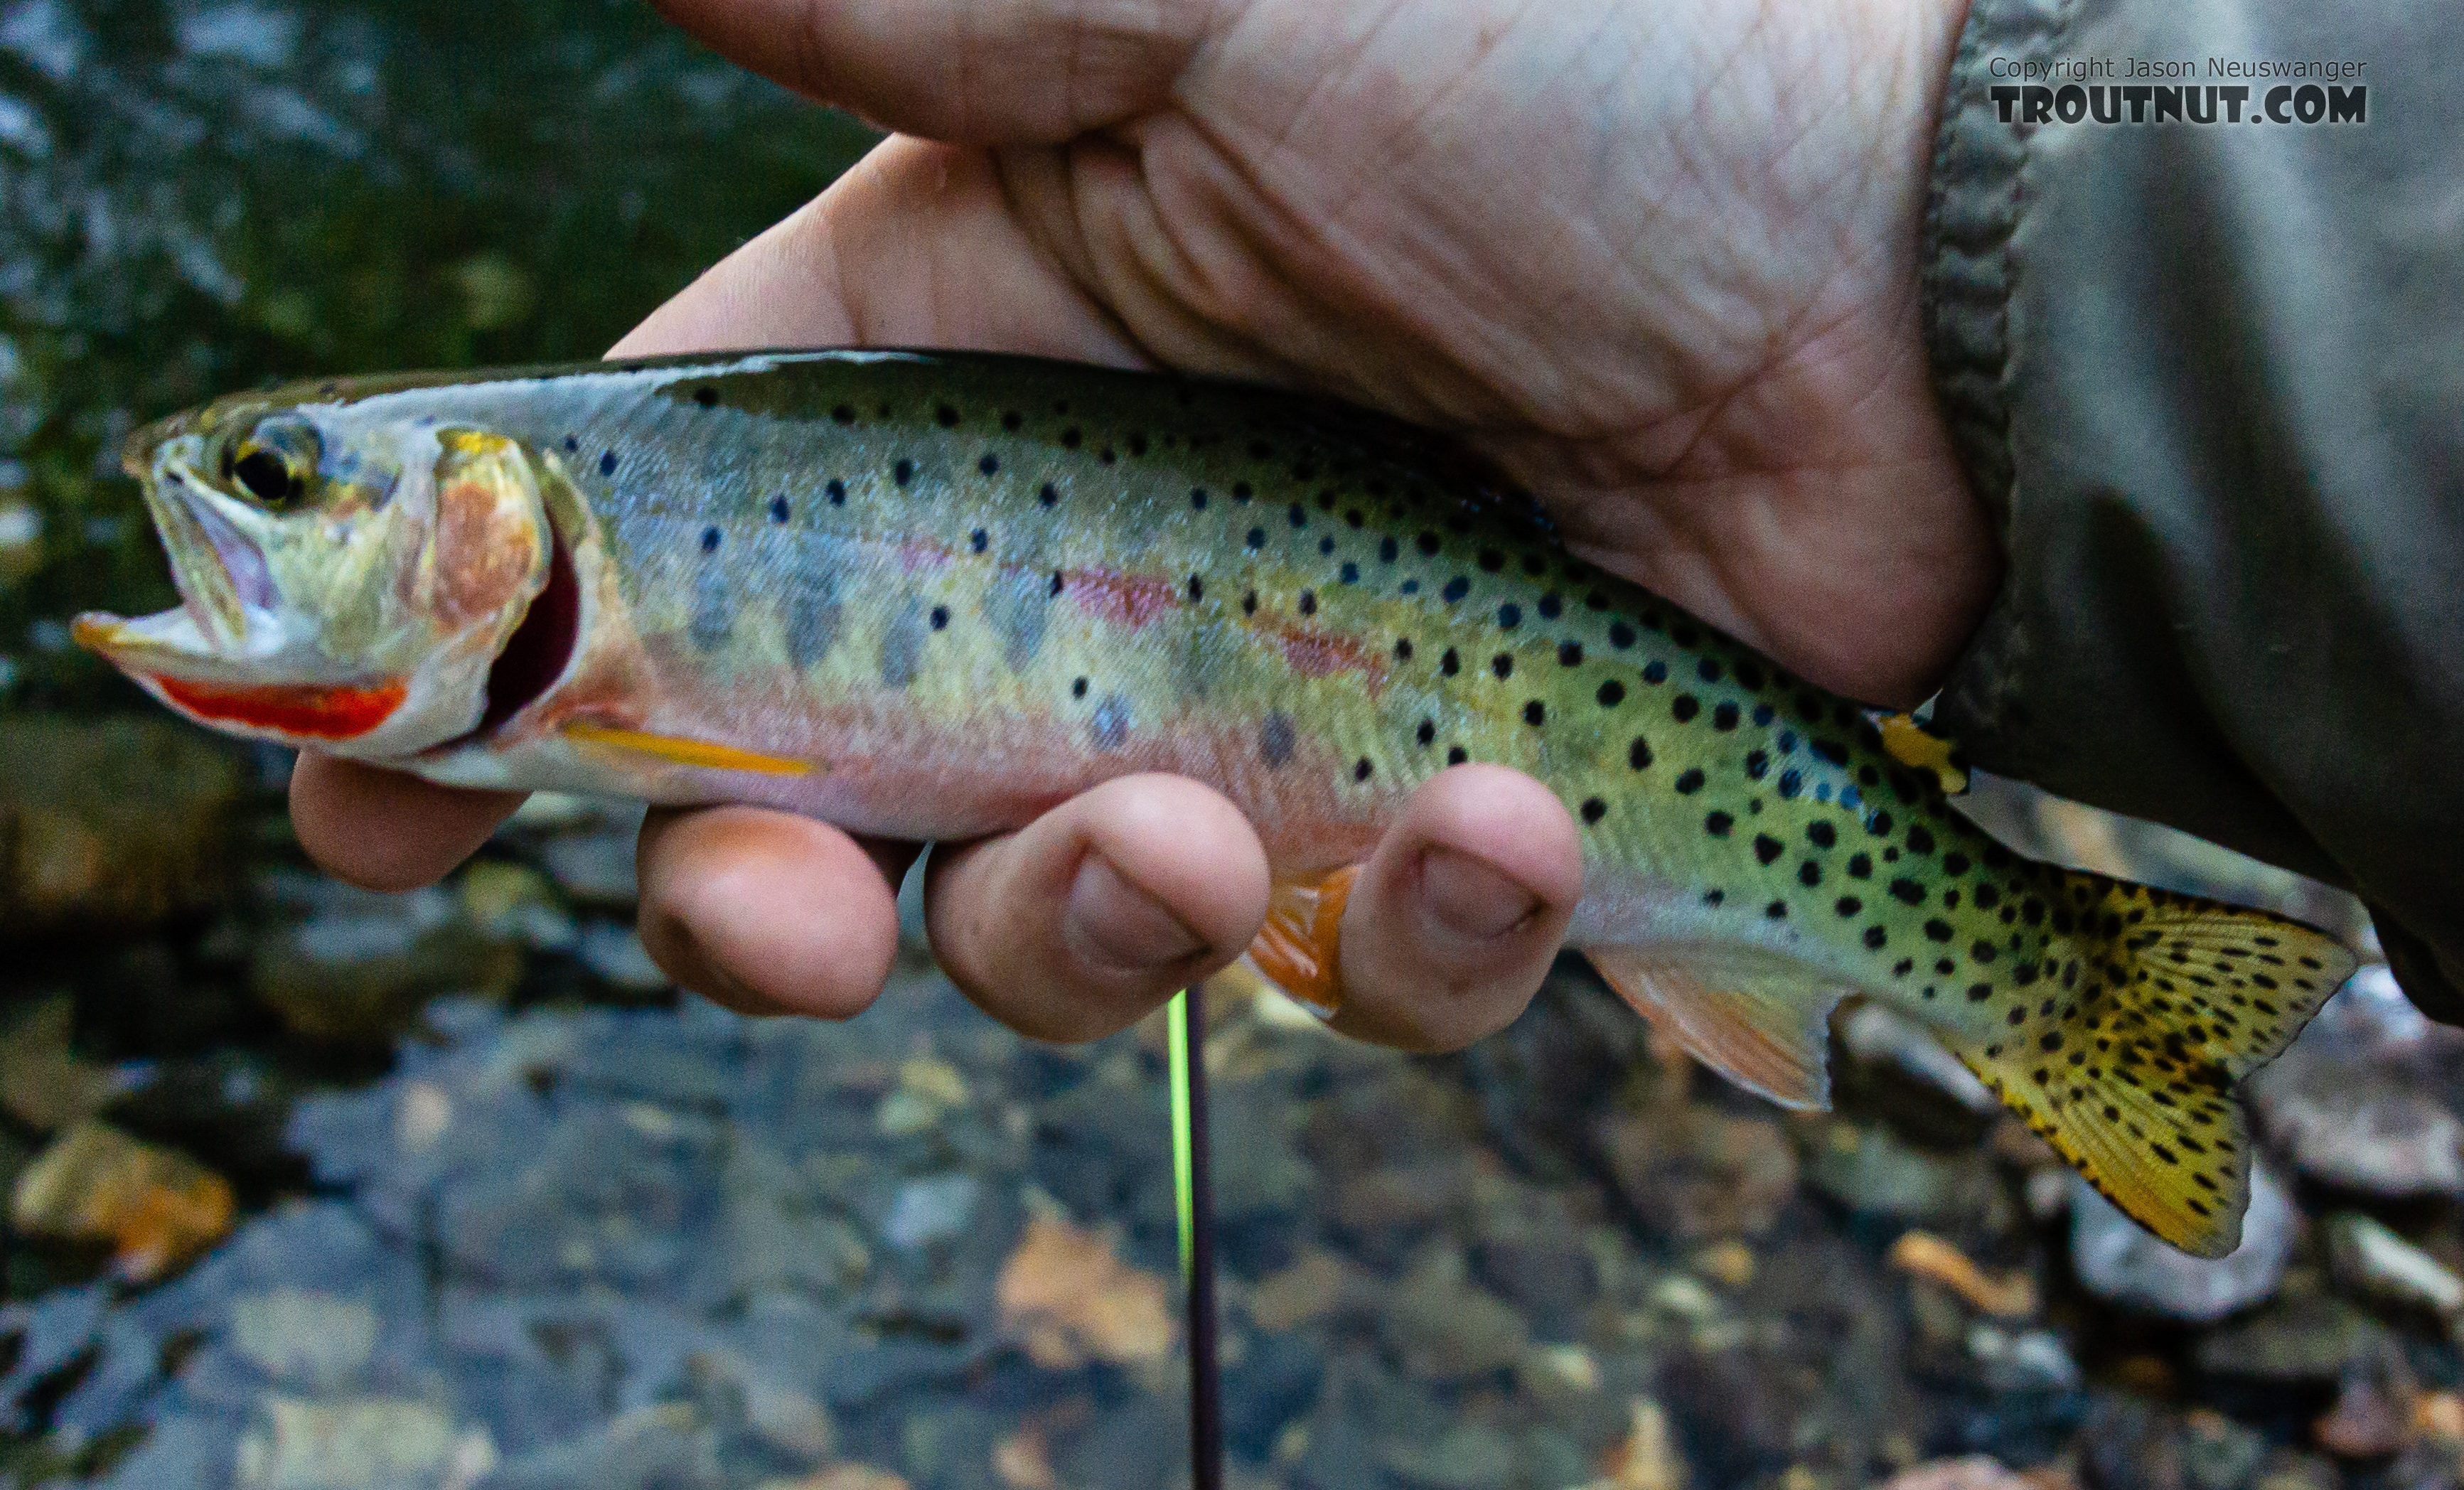 One of the last fish of the night, a bit blurry, but with too pretty a throat to pass up. From Mystery Creek # 249 in Washington.